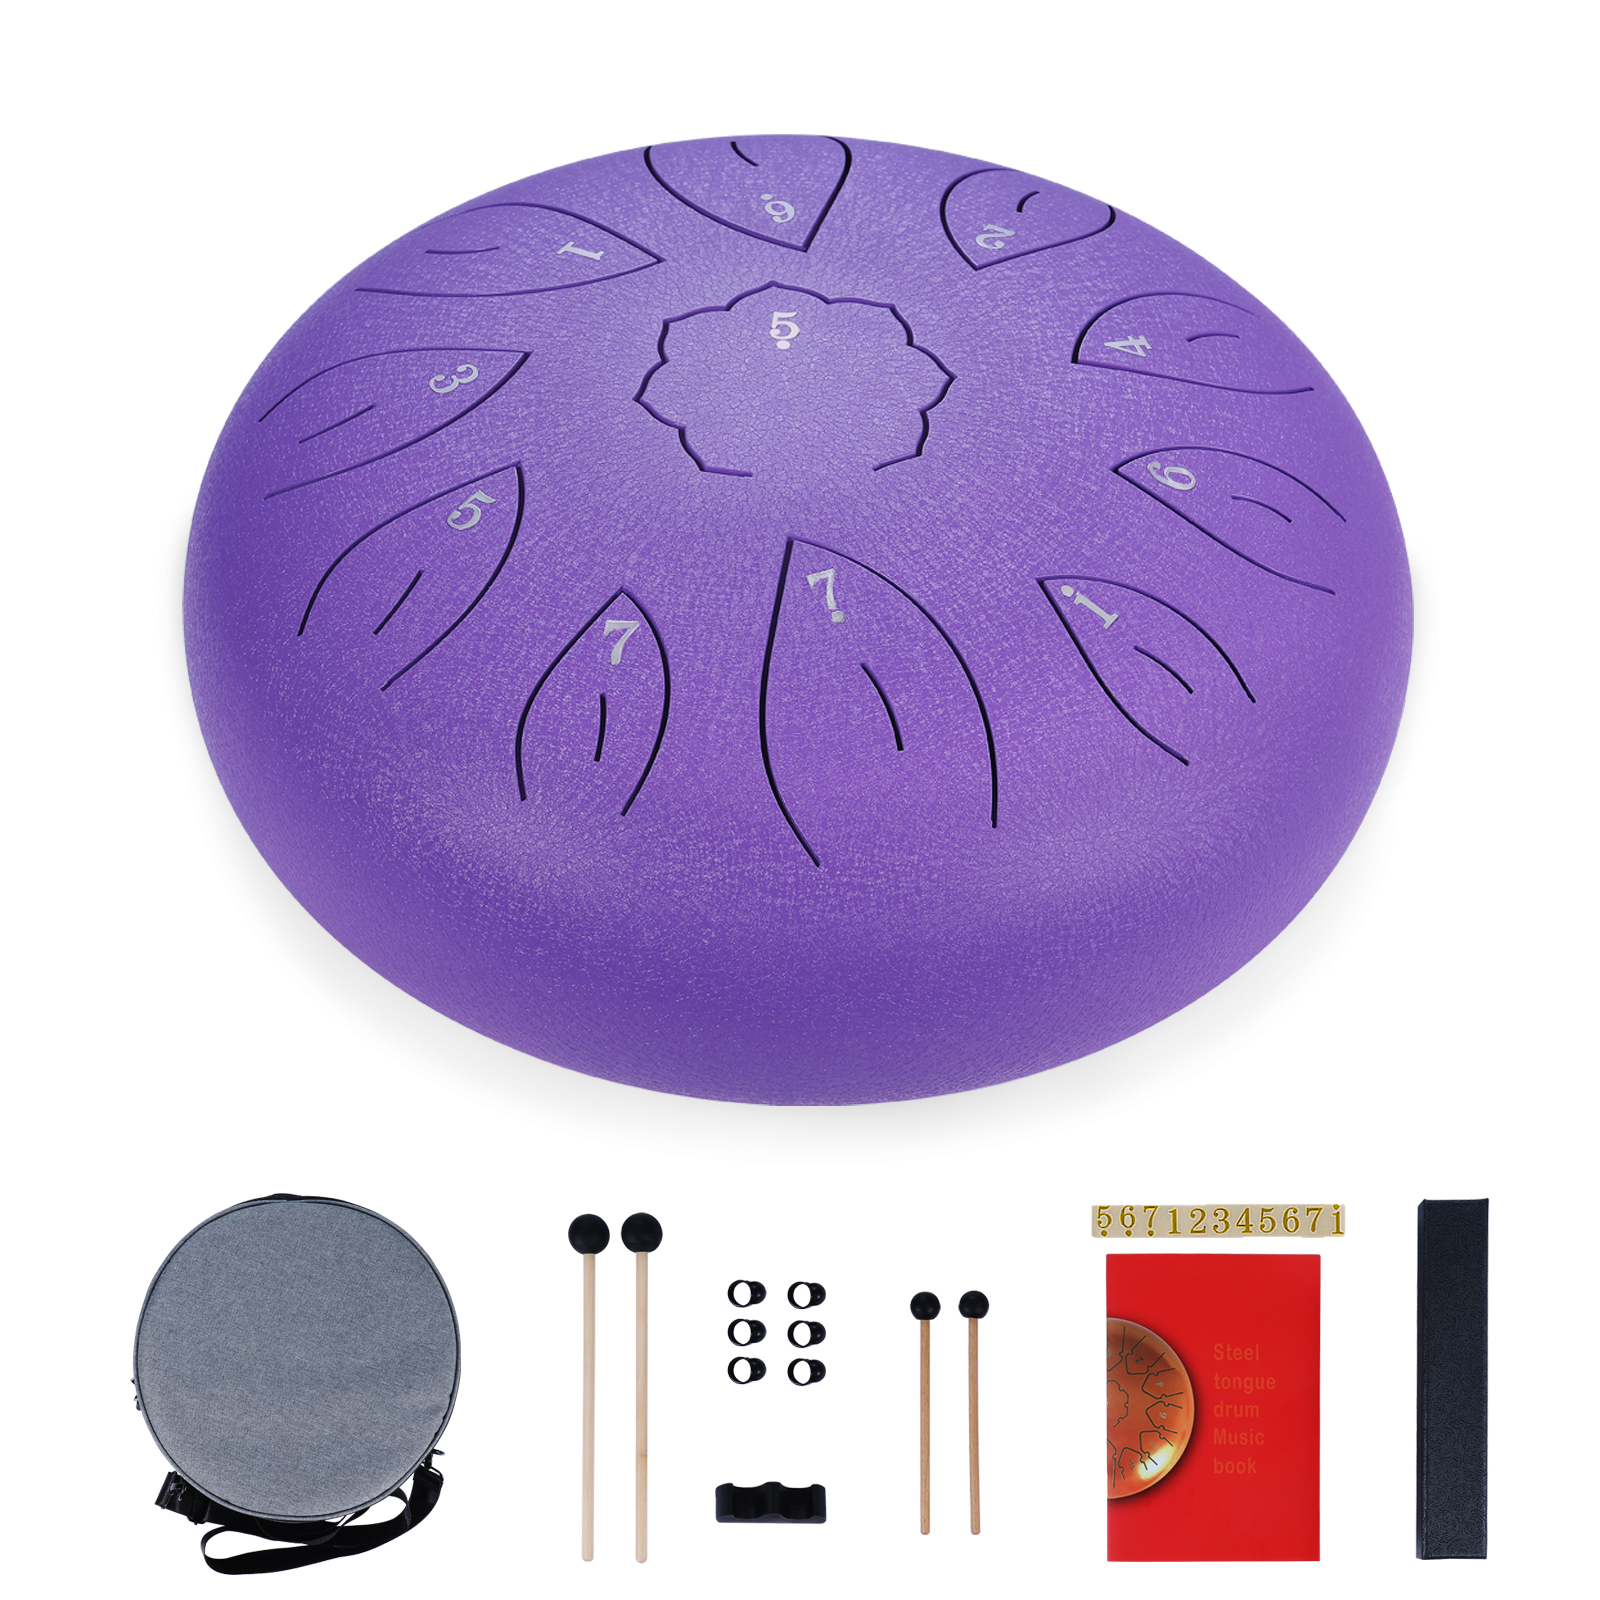 https://ranchguitar.com/wp-content/uploads/2022/03/Ranch-Steel-Tongue-Drum-10-Inches-11-Notes-Handpan-Drum-C-Key-Percussion-Instrument-Hand-Drum-for-Beginners-Easy-to-Learn-Tank-Drum-with-Bag-Mallets-Music-Book-Notes-Stickers-Finger-Picks.jpg